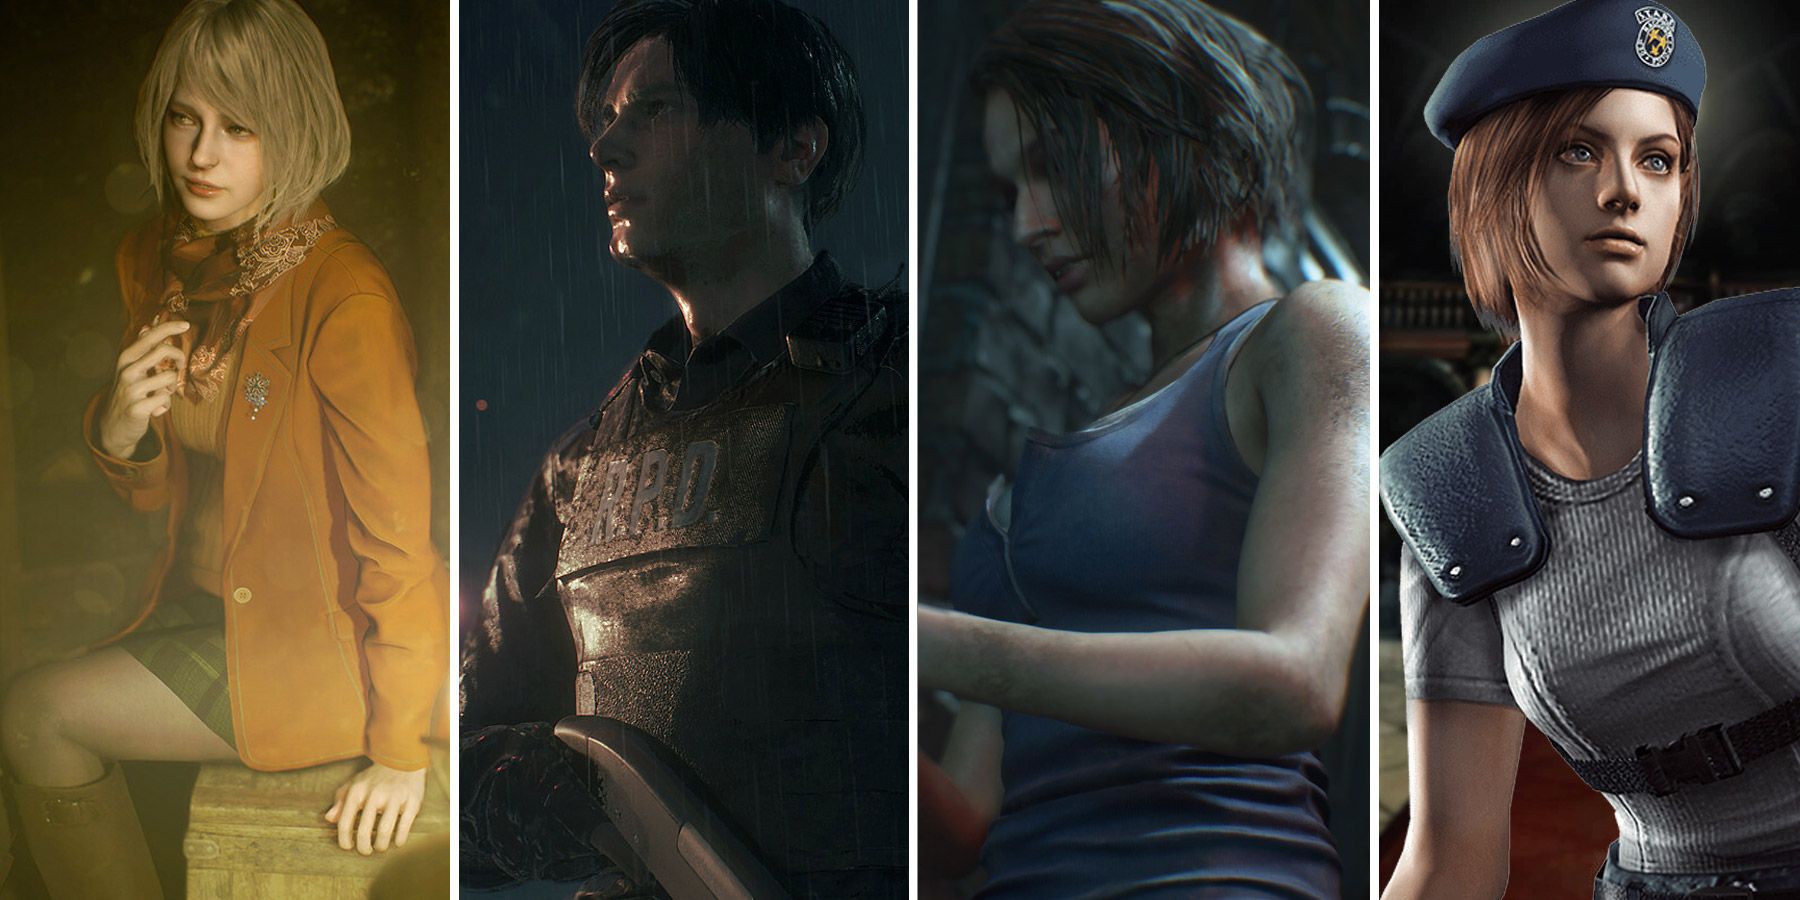 How Capcom Has Made its Resident Evil Franchise Immune to Remake Fatigue